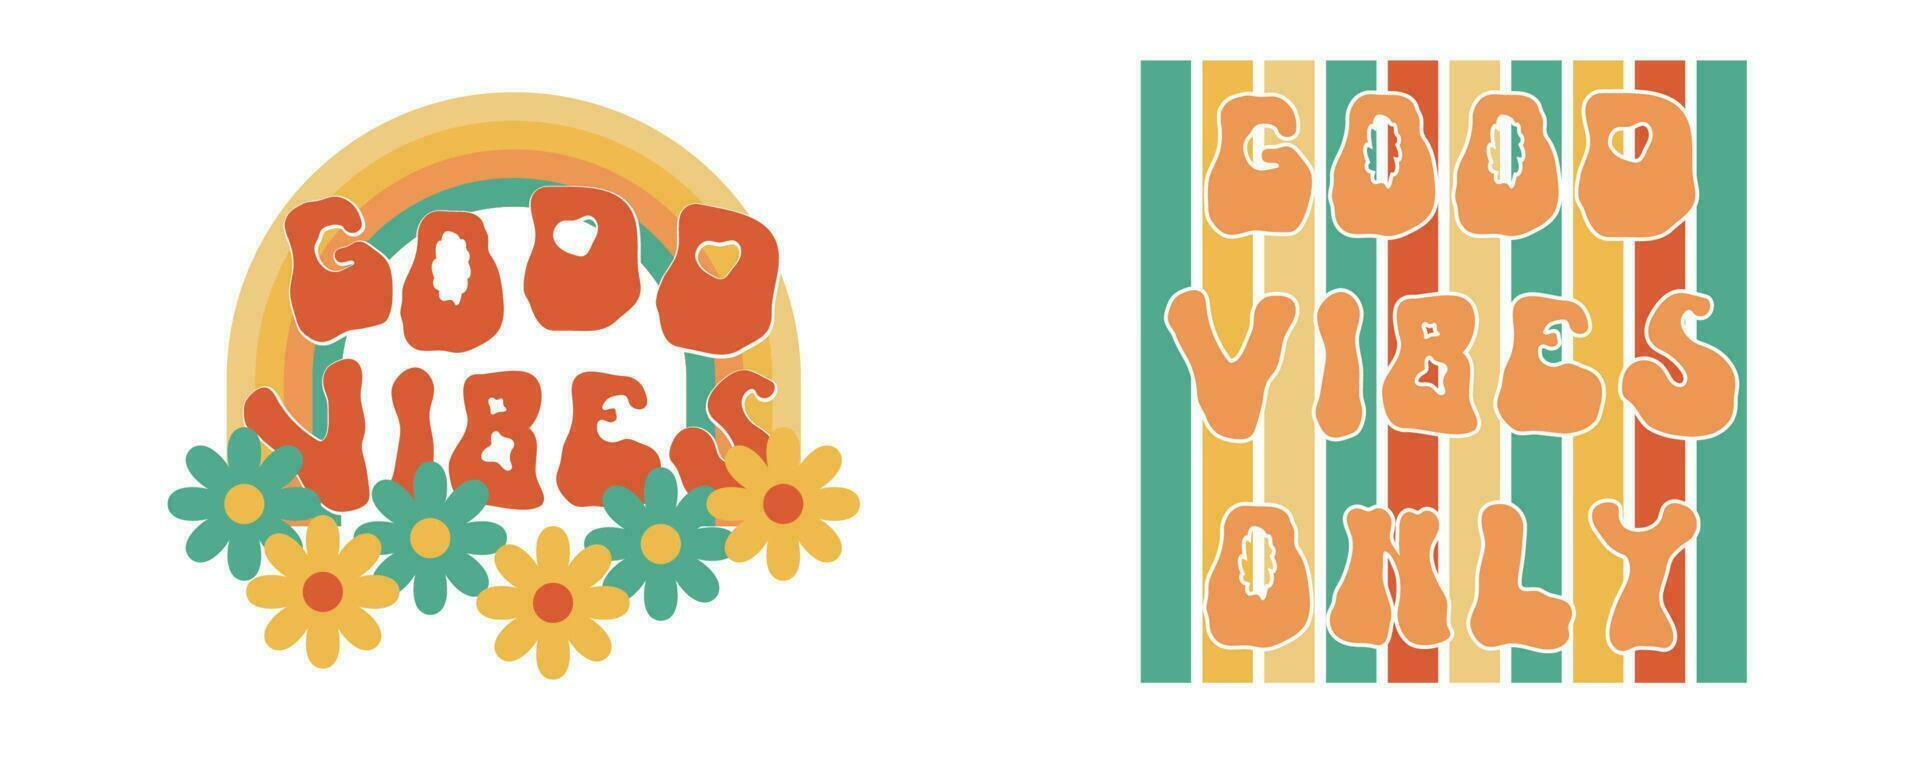 Good vibes retro vector slogan groovy rave trippy text. Vintage typography print summer design with daisy flowers sticker. Cute shirt quote phrase with stripe and rainbow illustration for inspiration